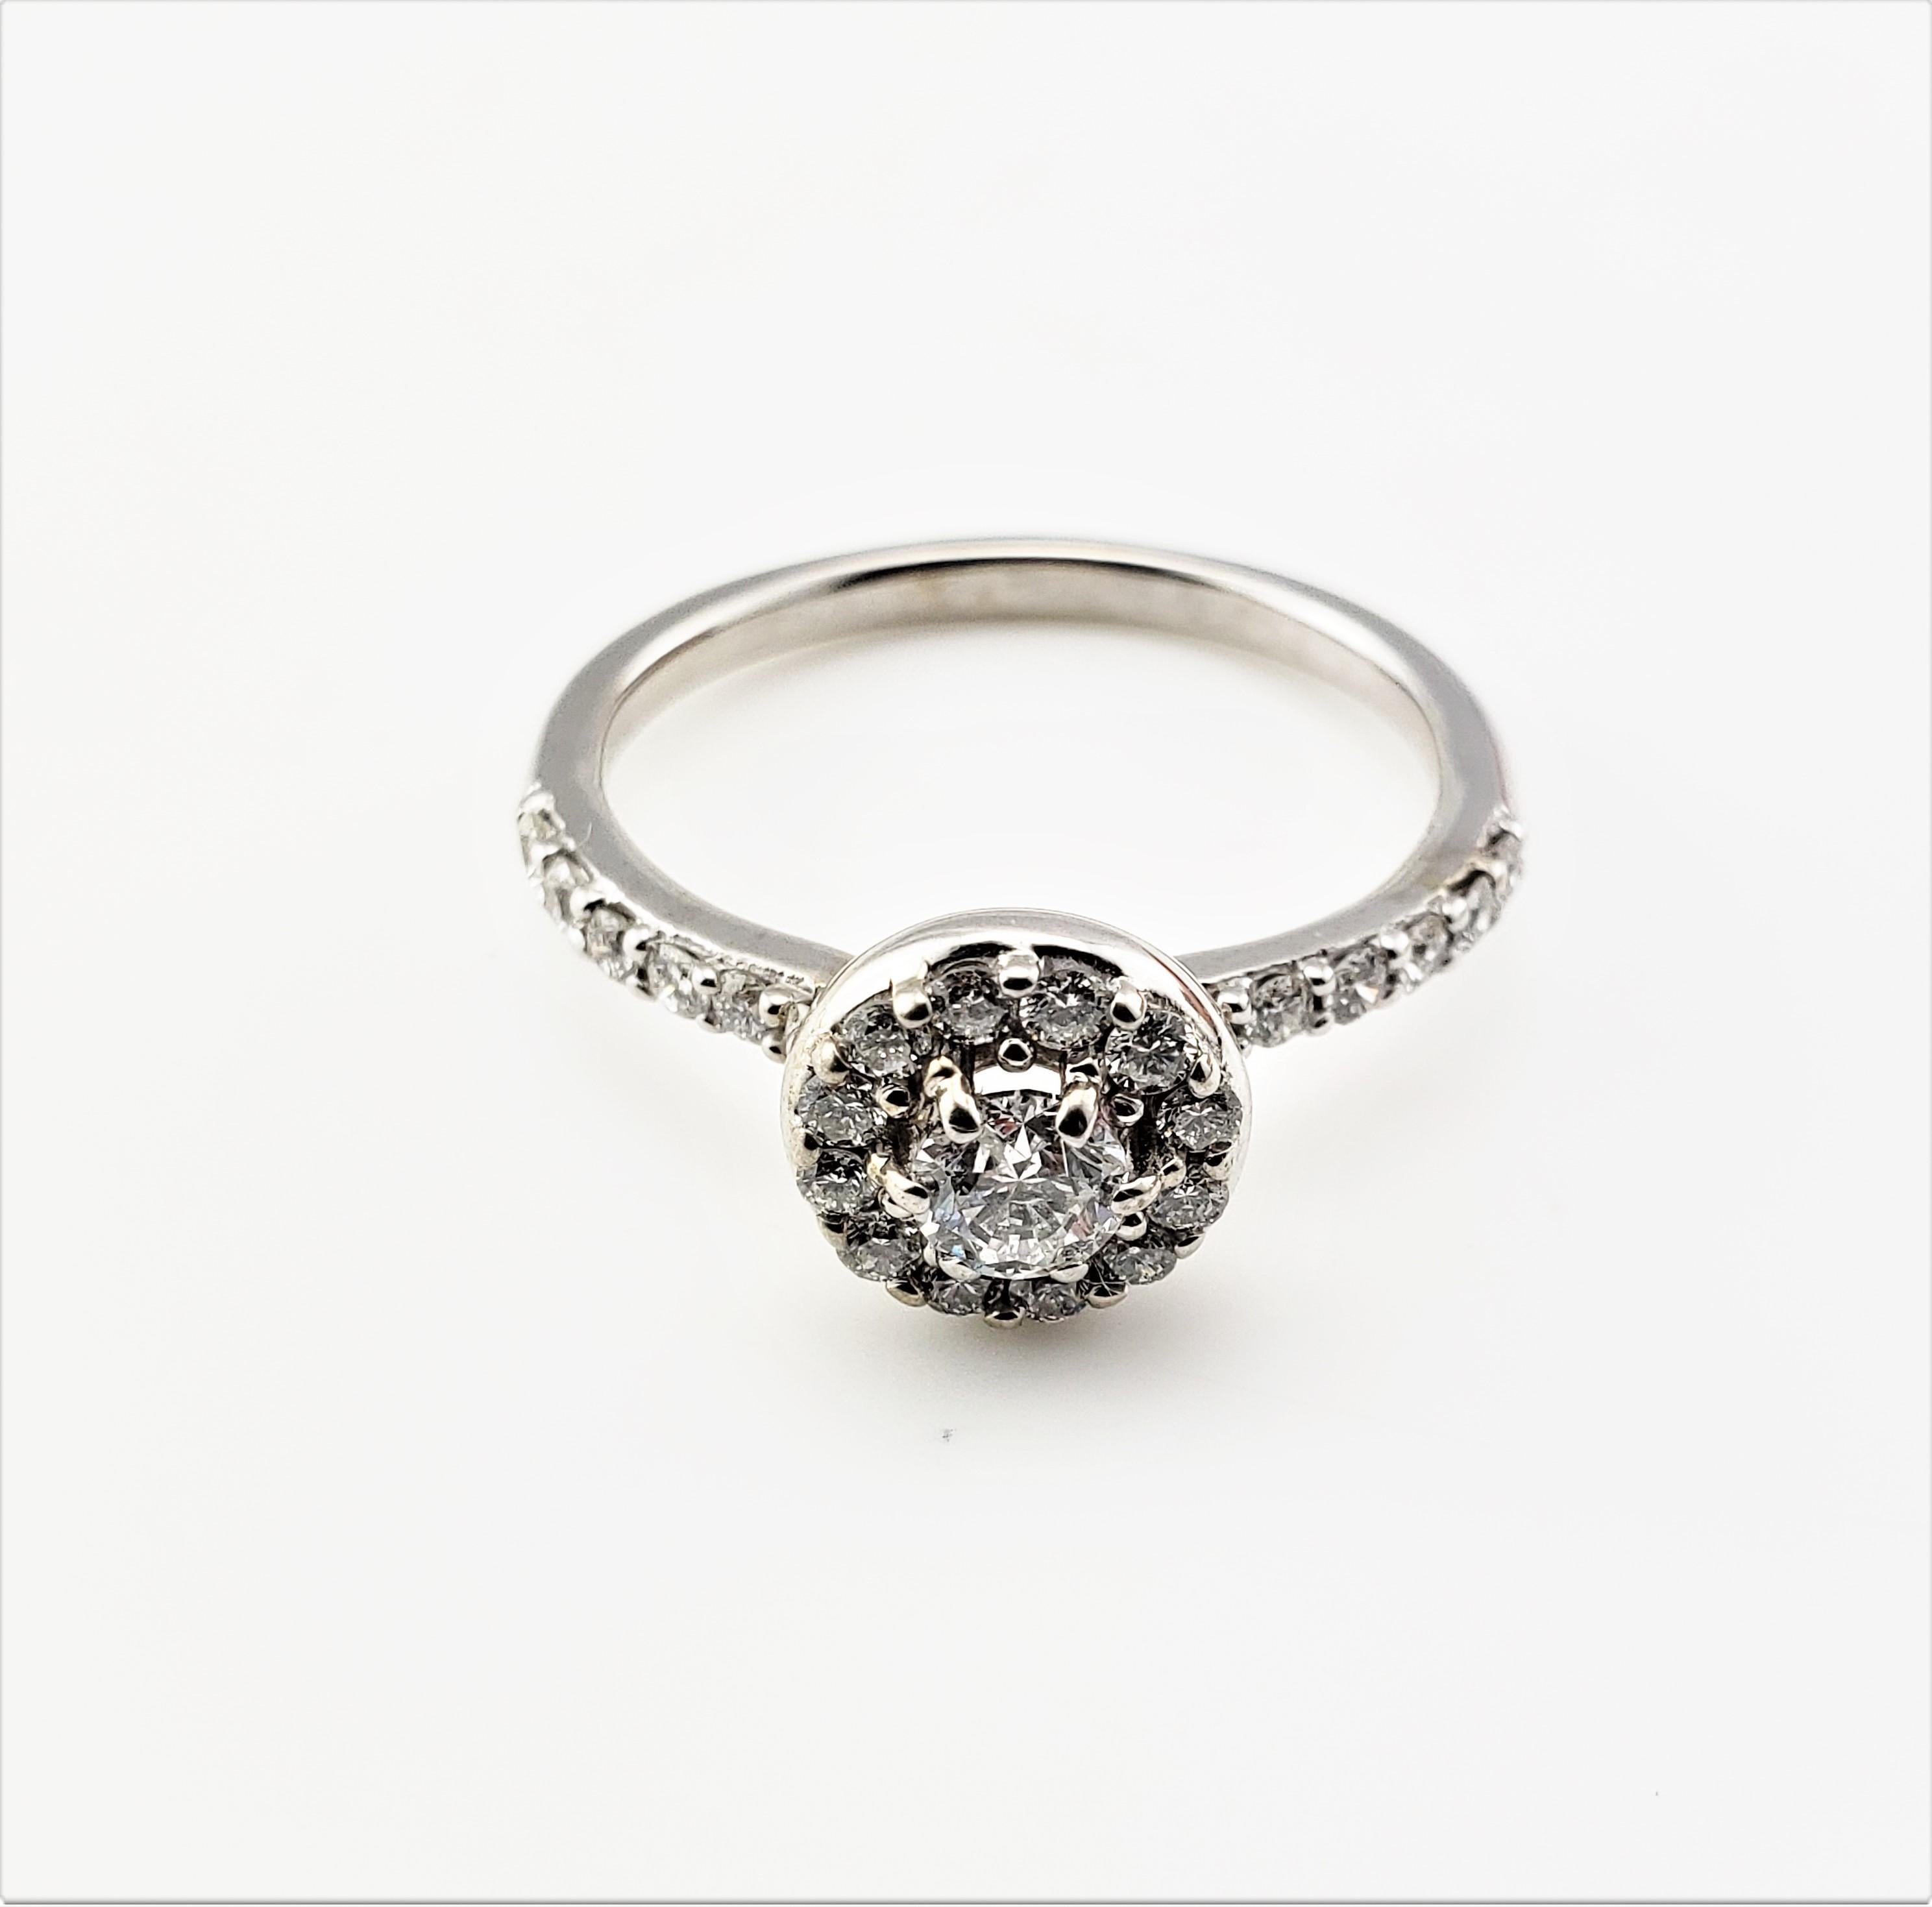 Vintage 14 Karat White Gold and Diamond Ring Size 8.5-

This sparkling ring features 25 round brilliant cut diamonds (center .27 ct.), halo and band (.48 tcw.) set in beautifully detailed 14K white gold. Shank: 2 mm. Top of ring measures 9